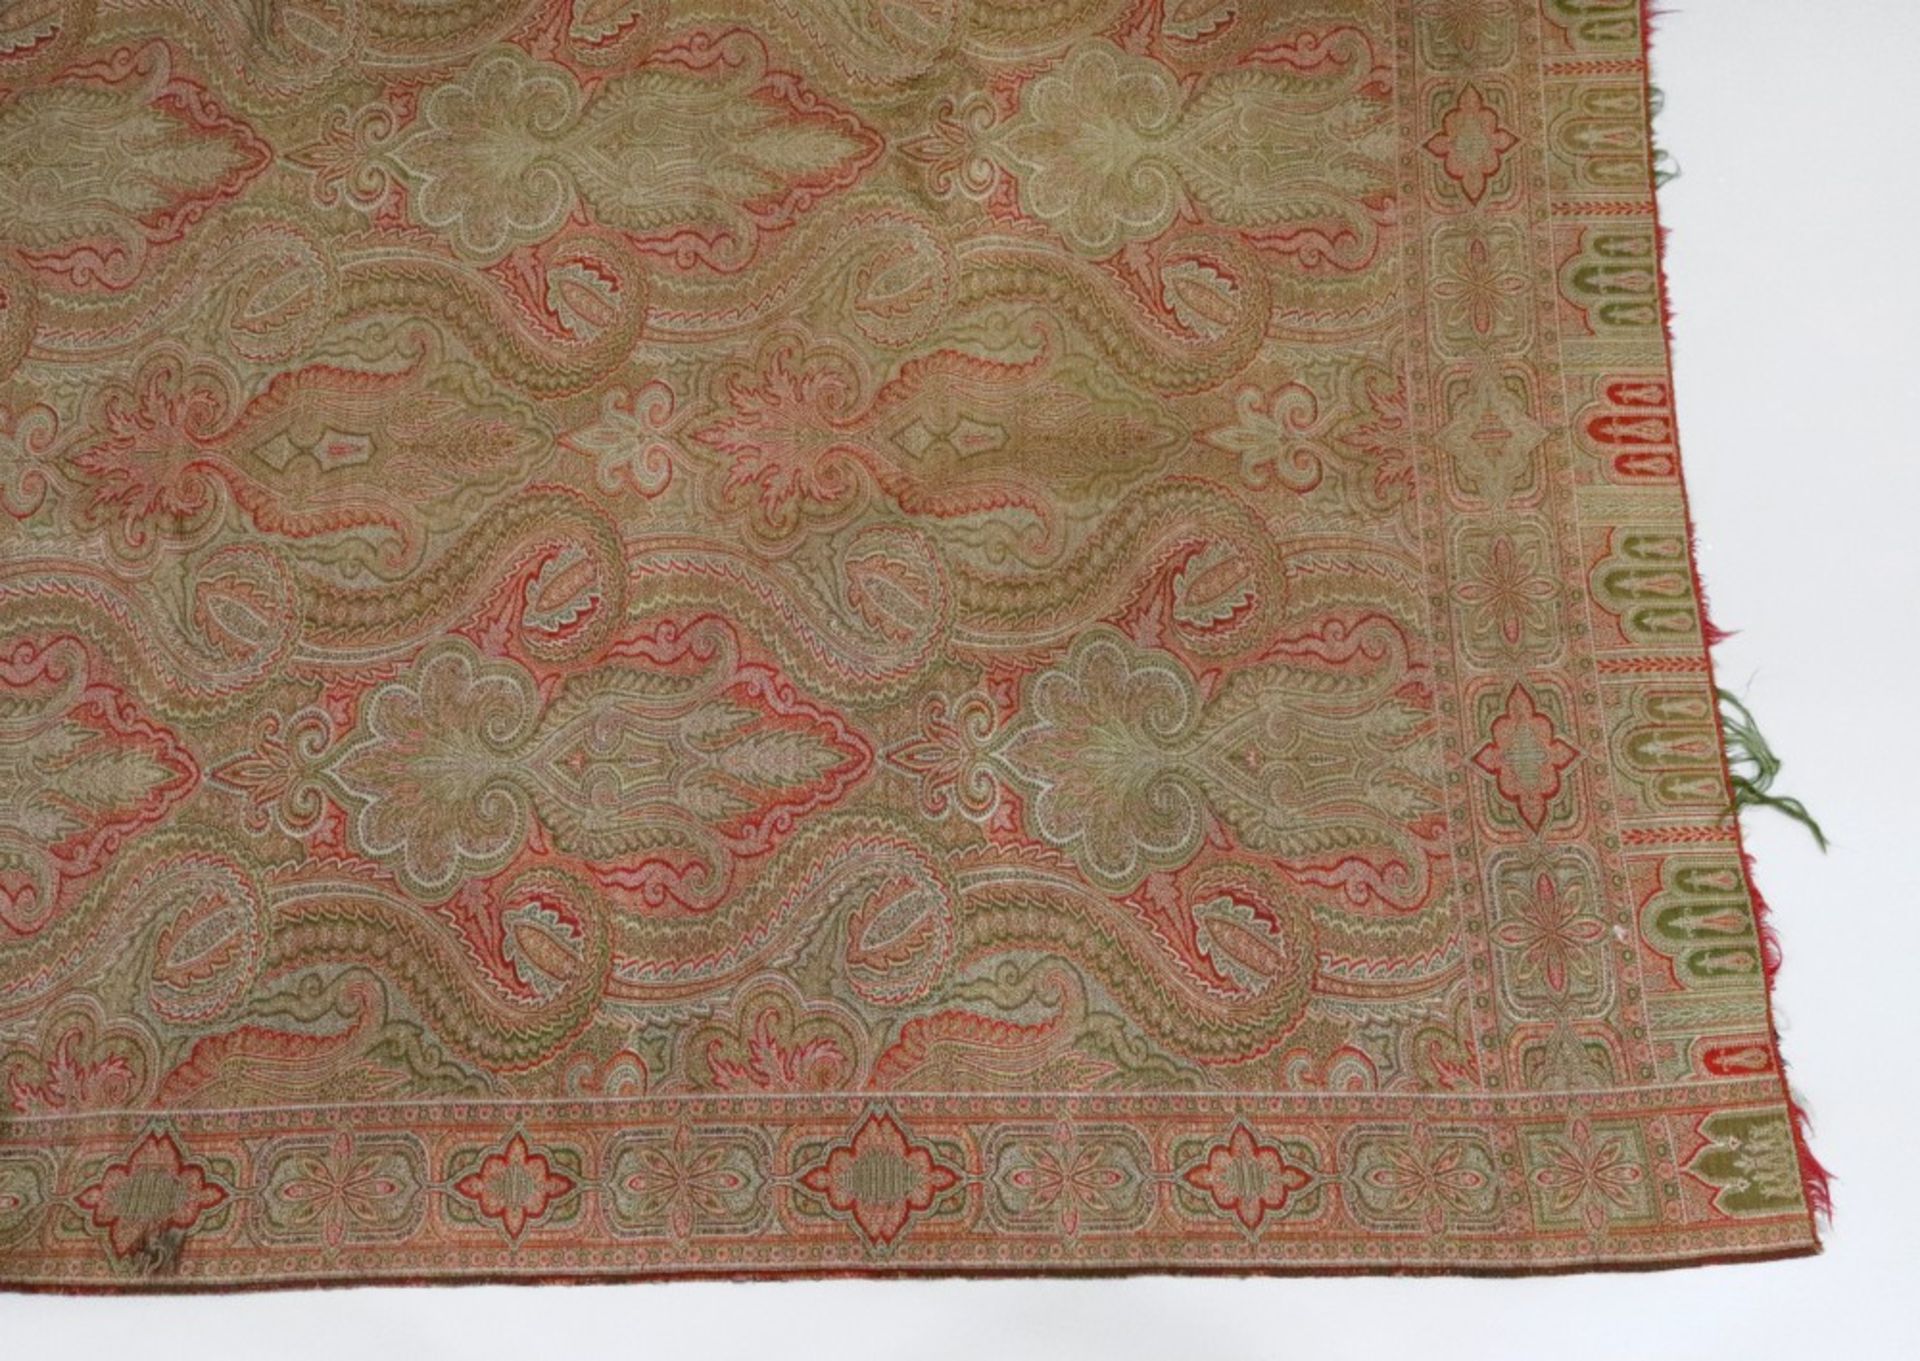 A paisley shawl, late 19th/early 20th century, typically patterned, 175 x 175cm.